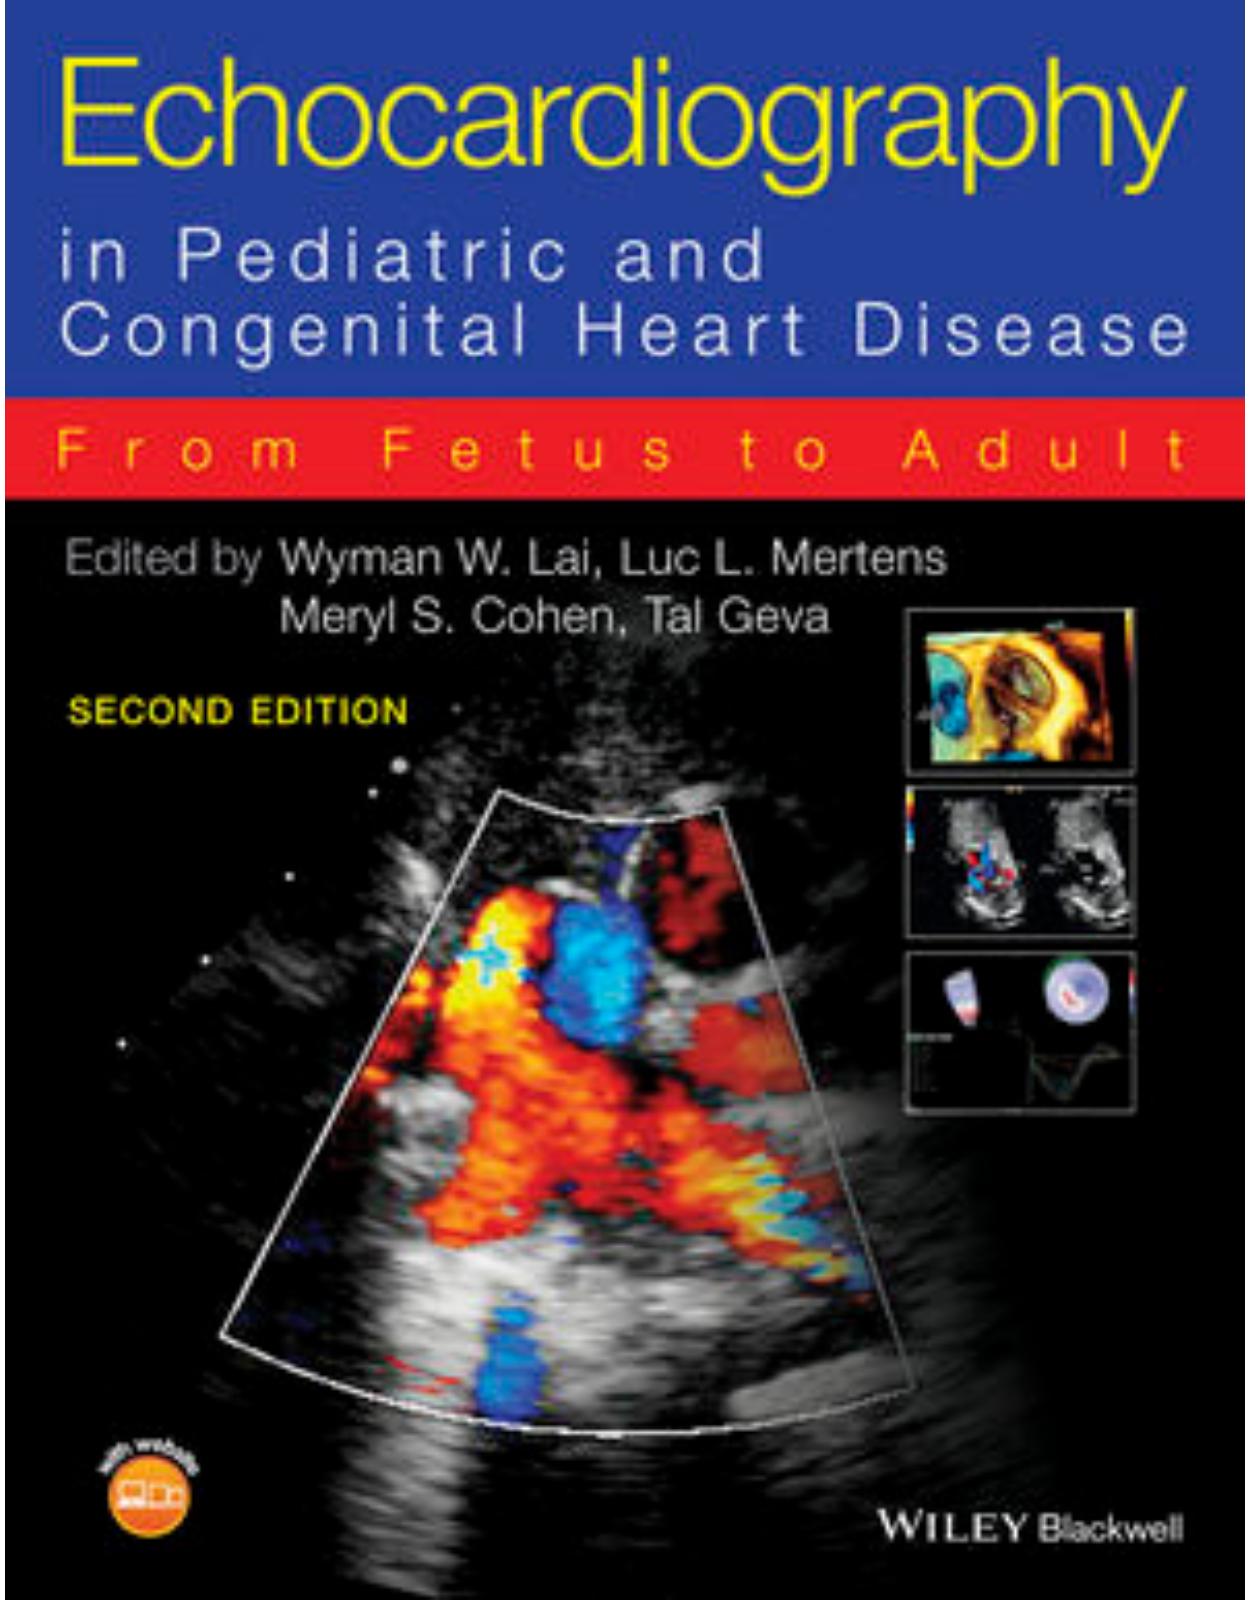 Echocardiography in Pediatric and Congenital Heart Disease - From Fetus to Adult